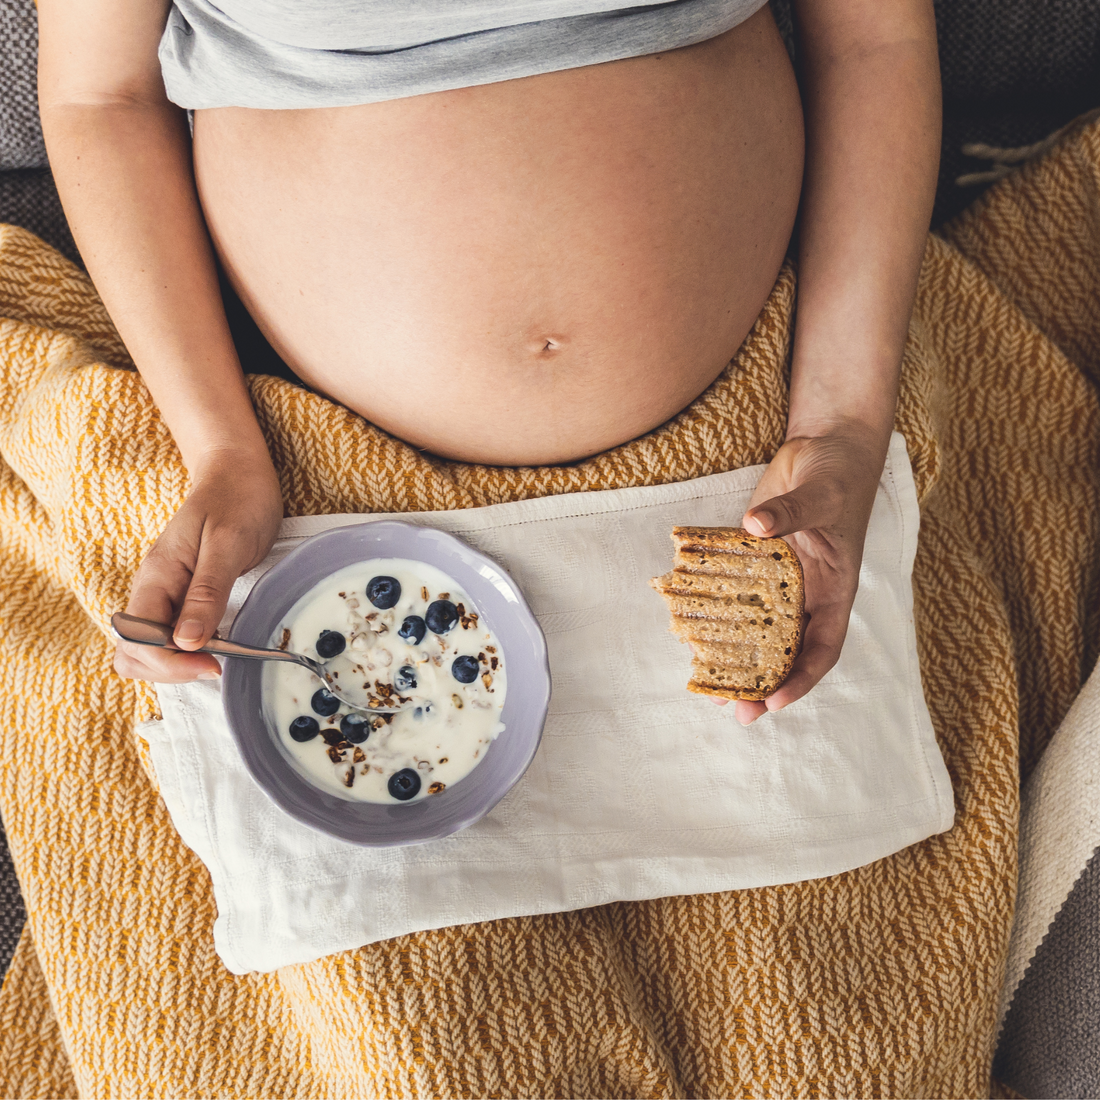 Food Cravings in Pregnancy: What Can They Mean?